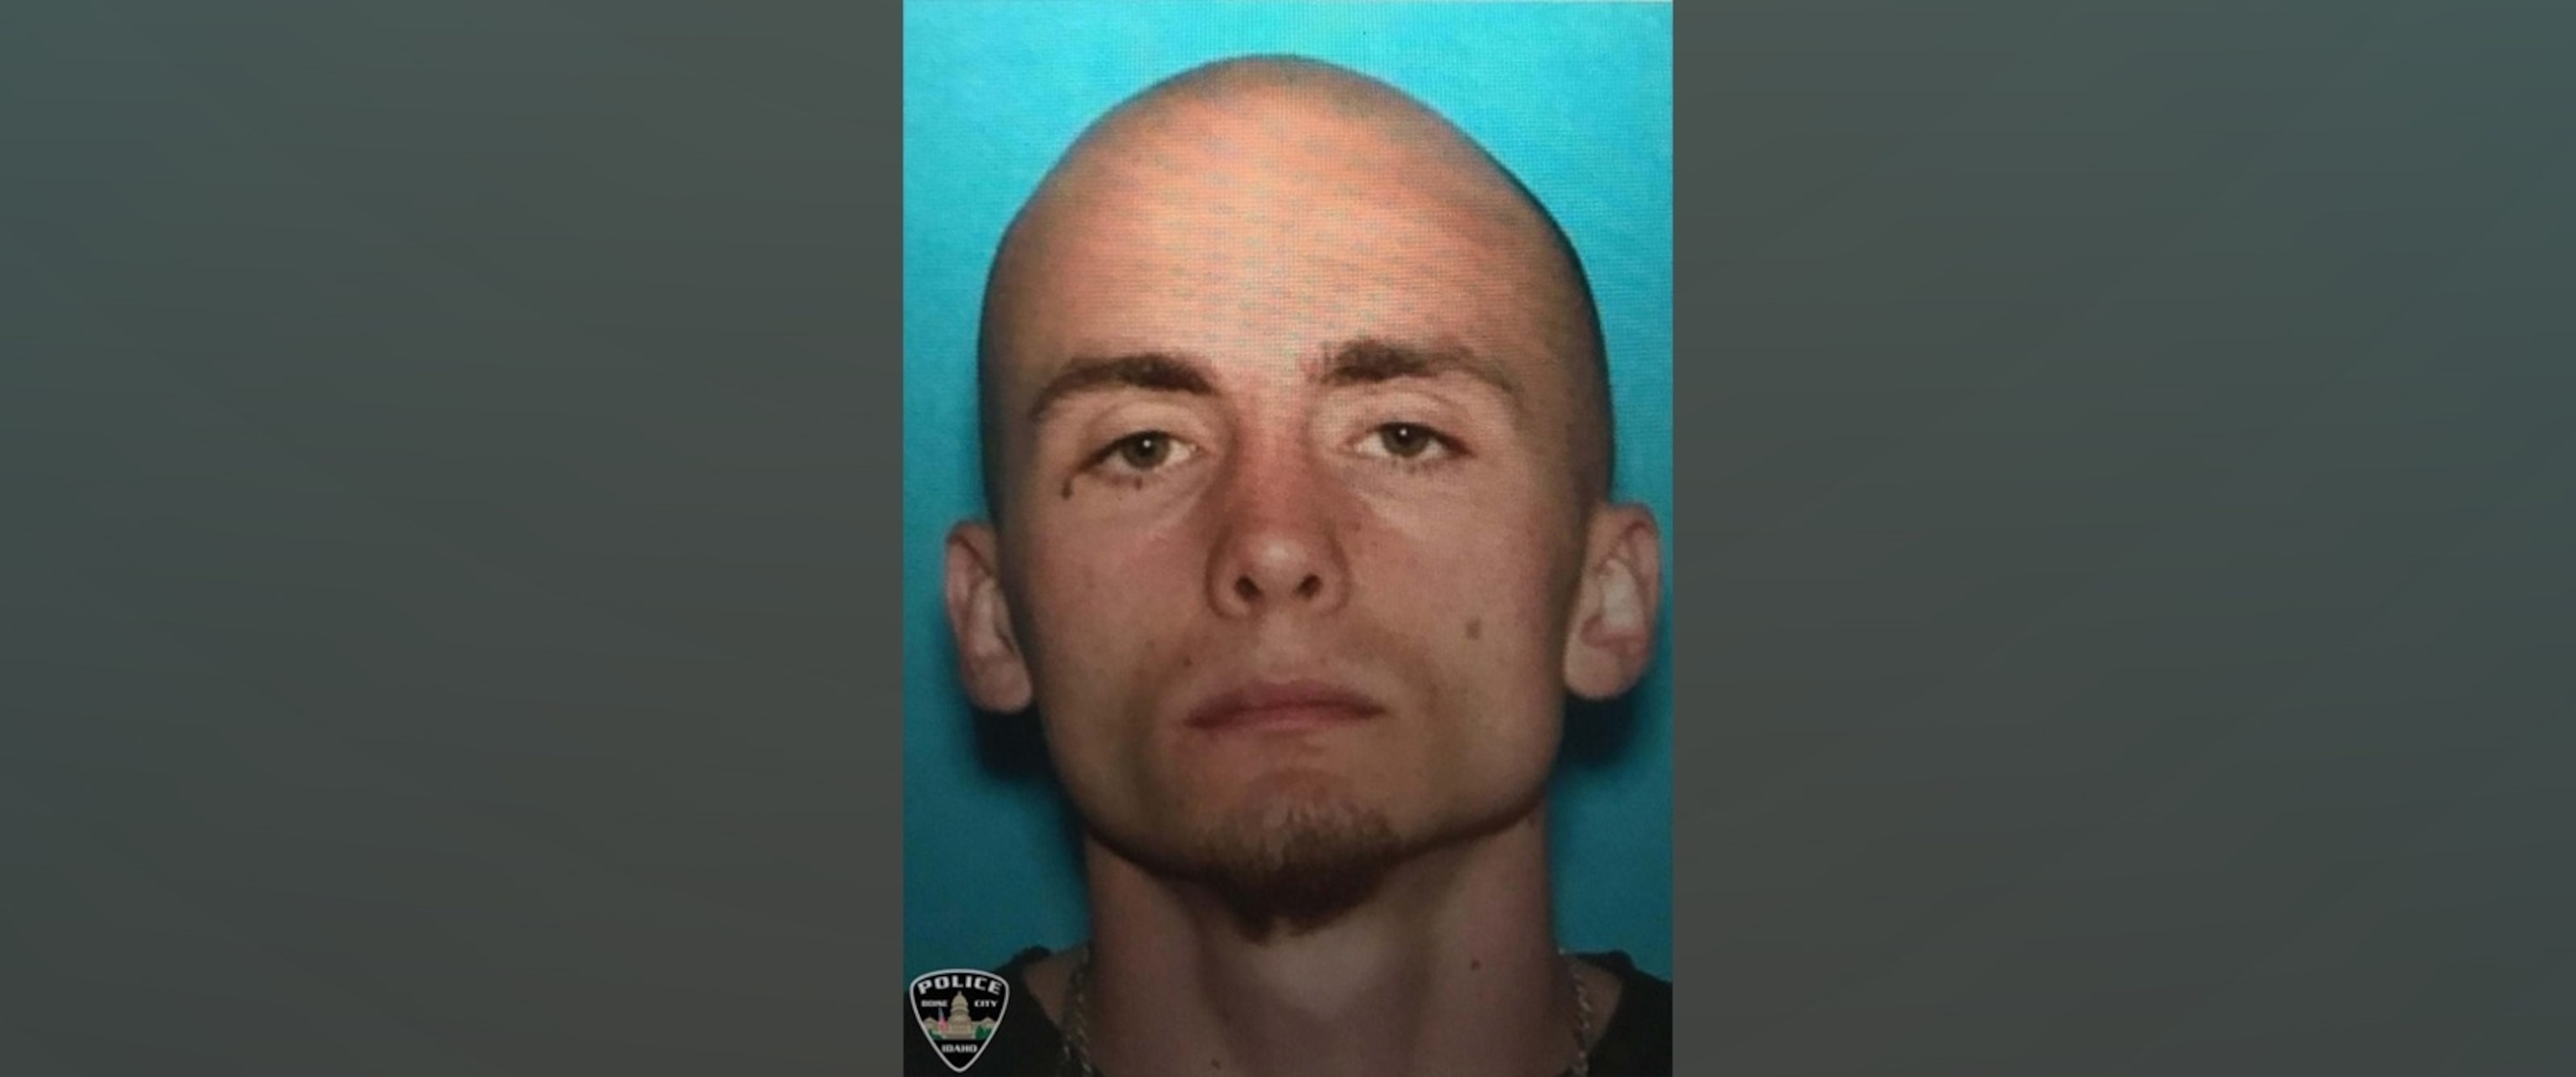 PHOTO: The Boise Police Department released this photo of Skylar Meade.